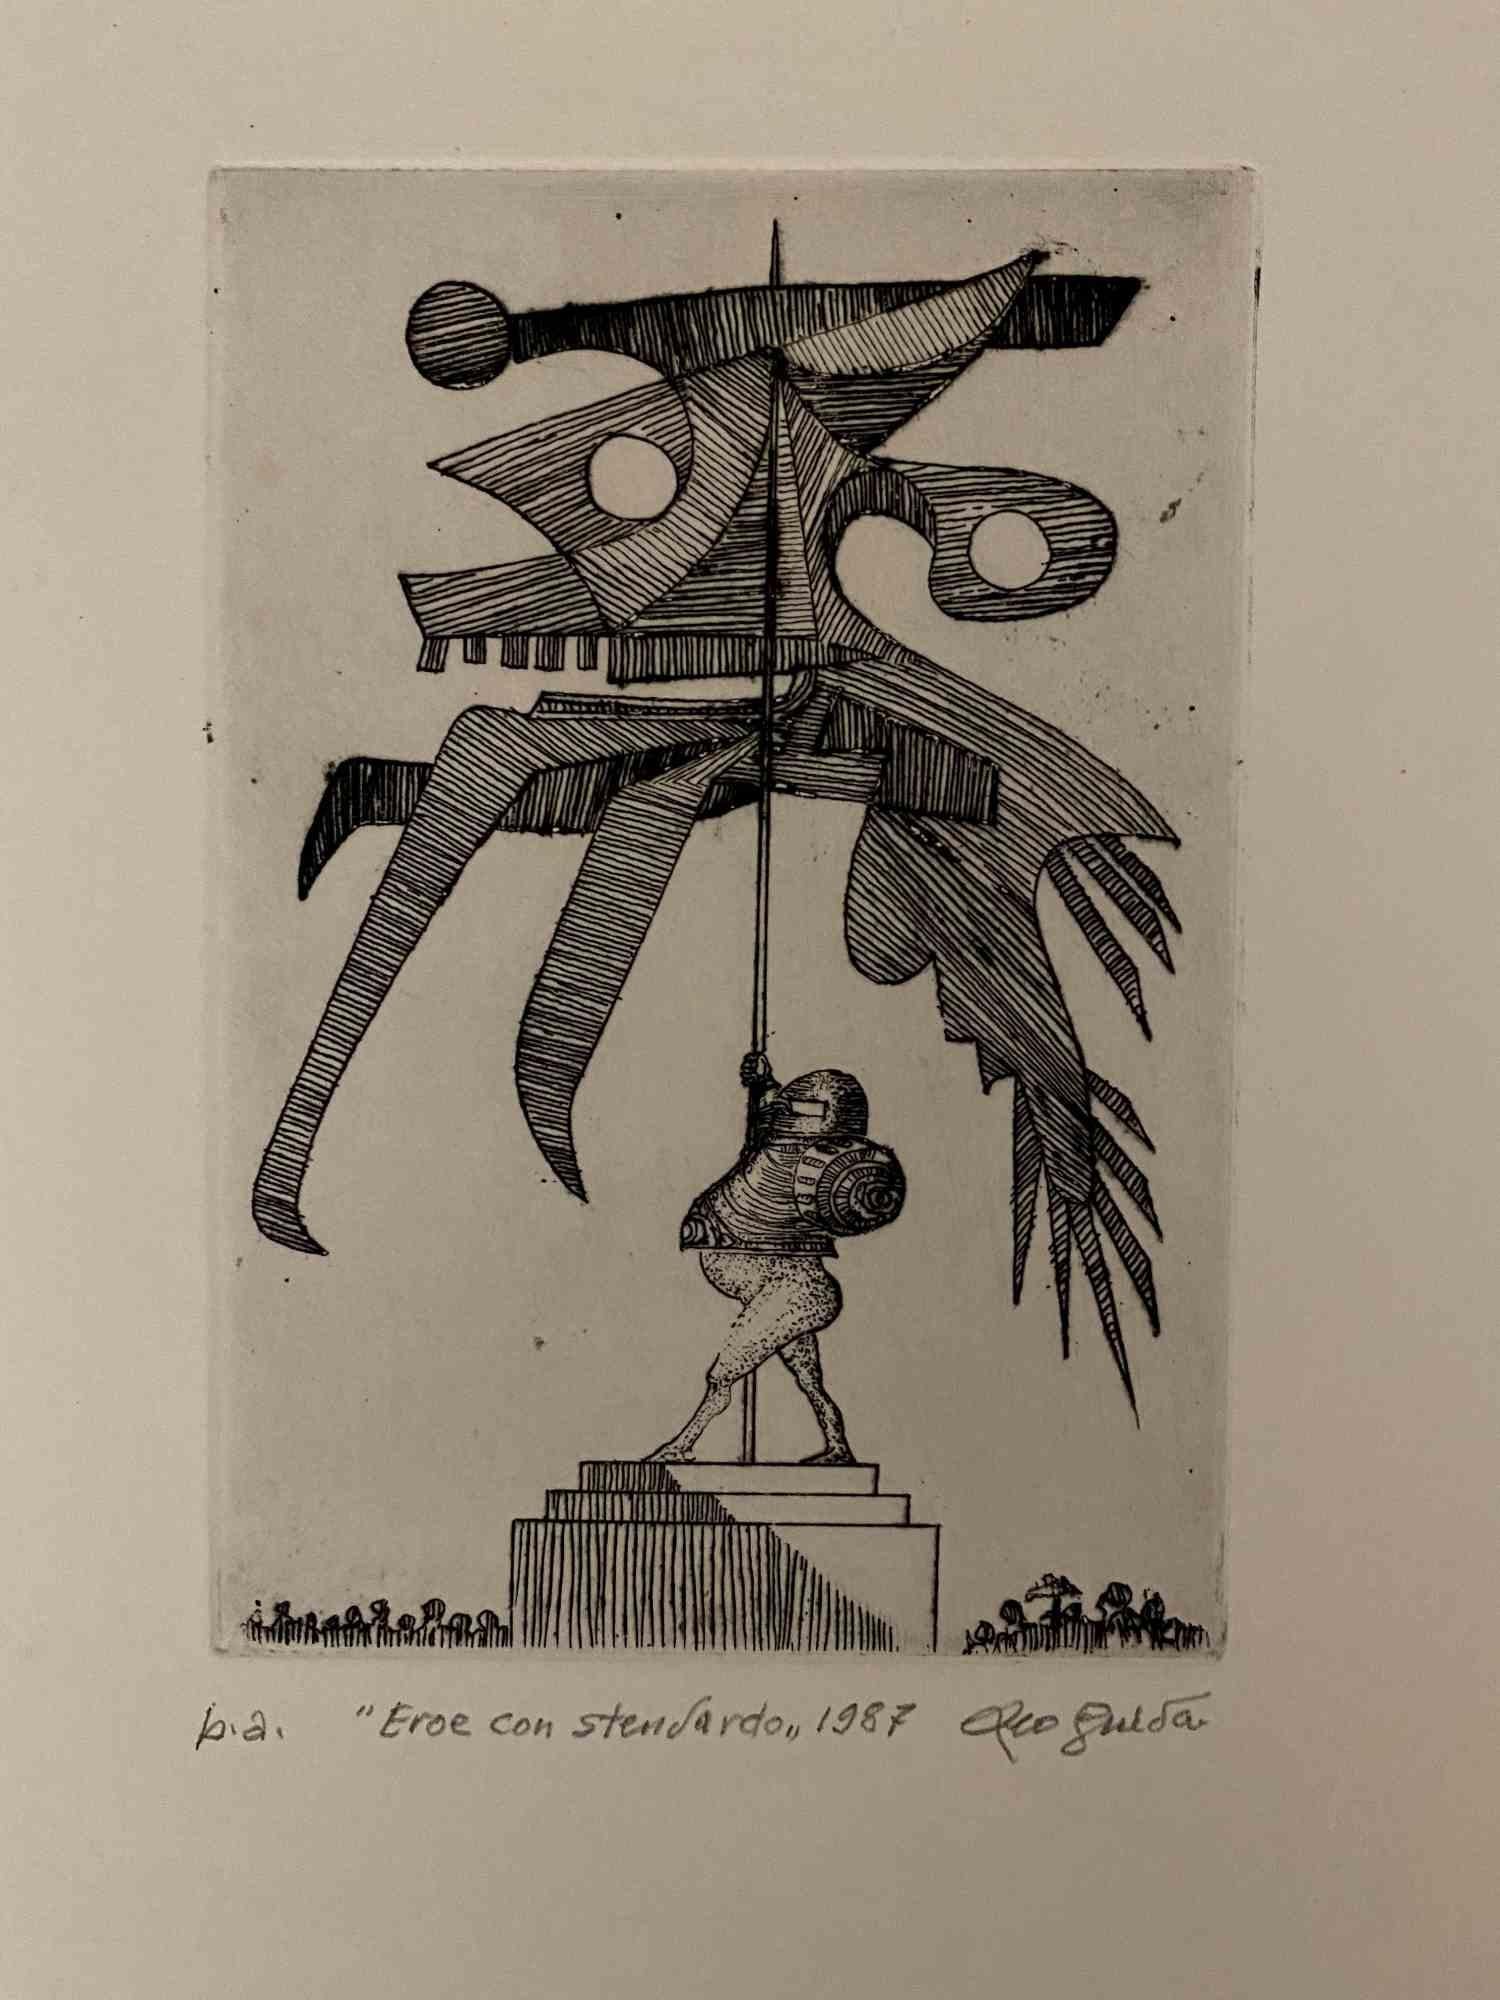 Hero with the banner is an original Contemporary artwork realized in 1987 by the Italian Contemporary artist  Leo Guida  (1992 - 2017).

Original etching on paper

Hand-signed on the lower right in pencil and dated.

Artist's proof, on the lower